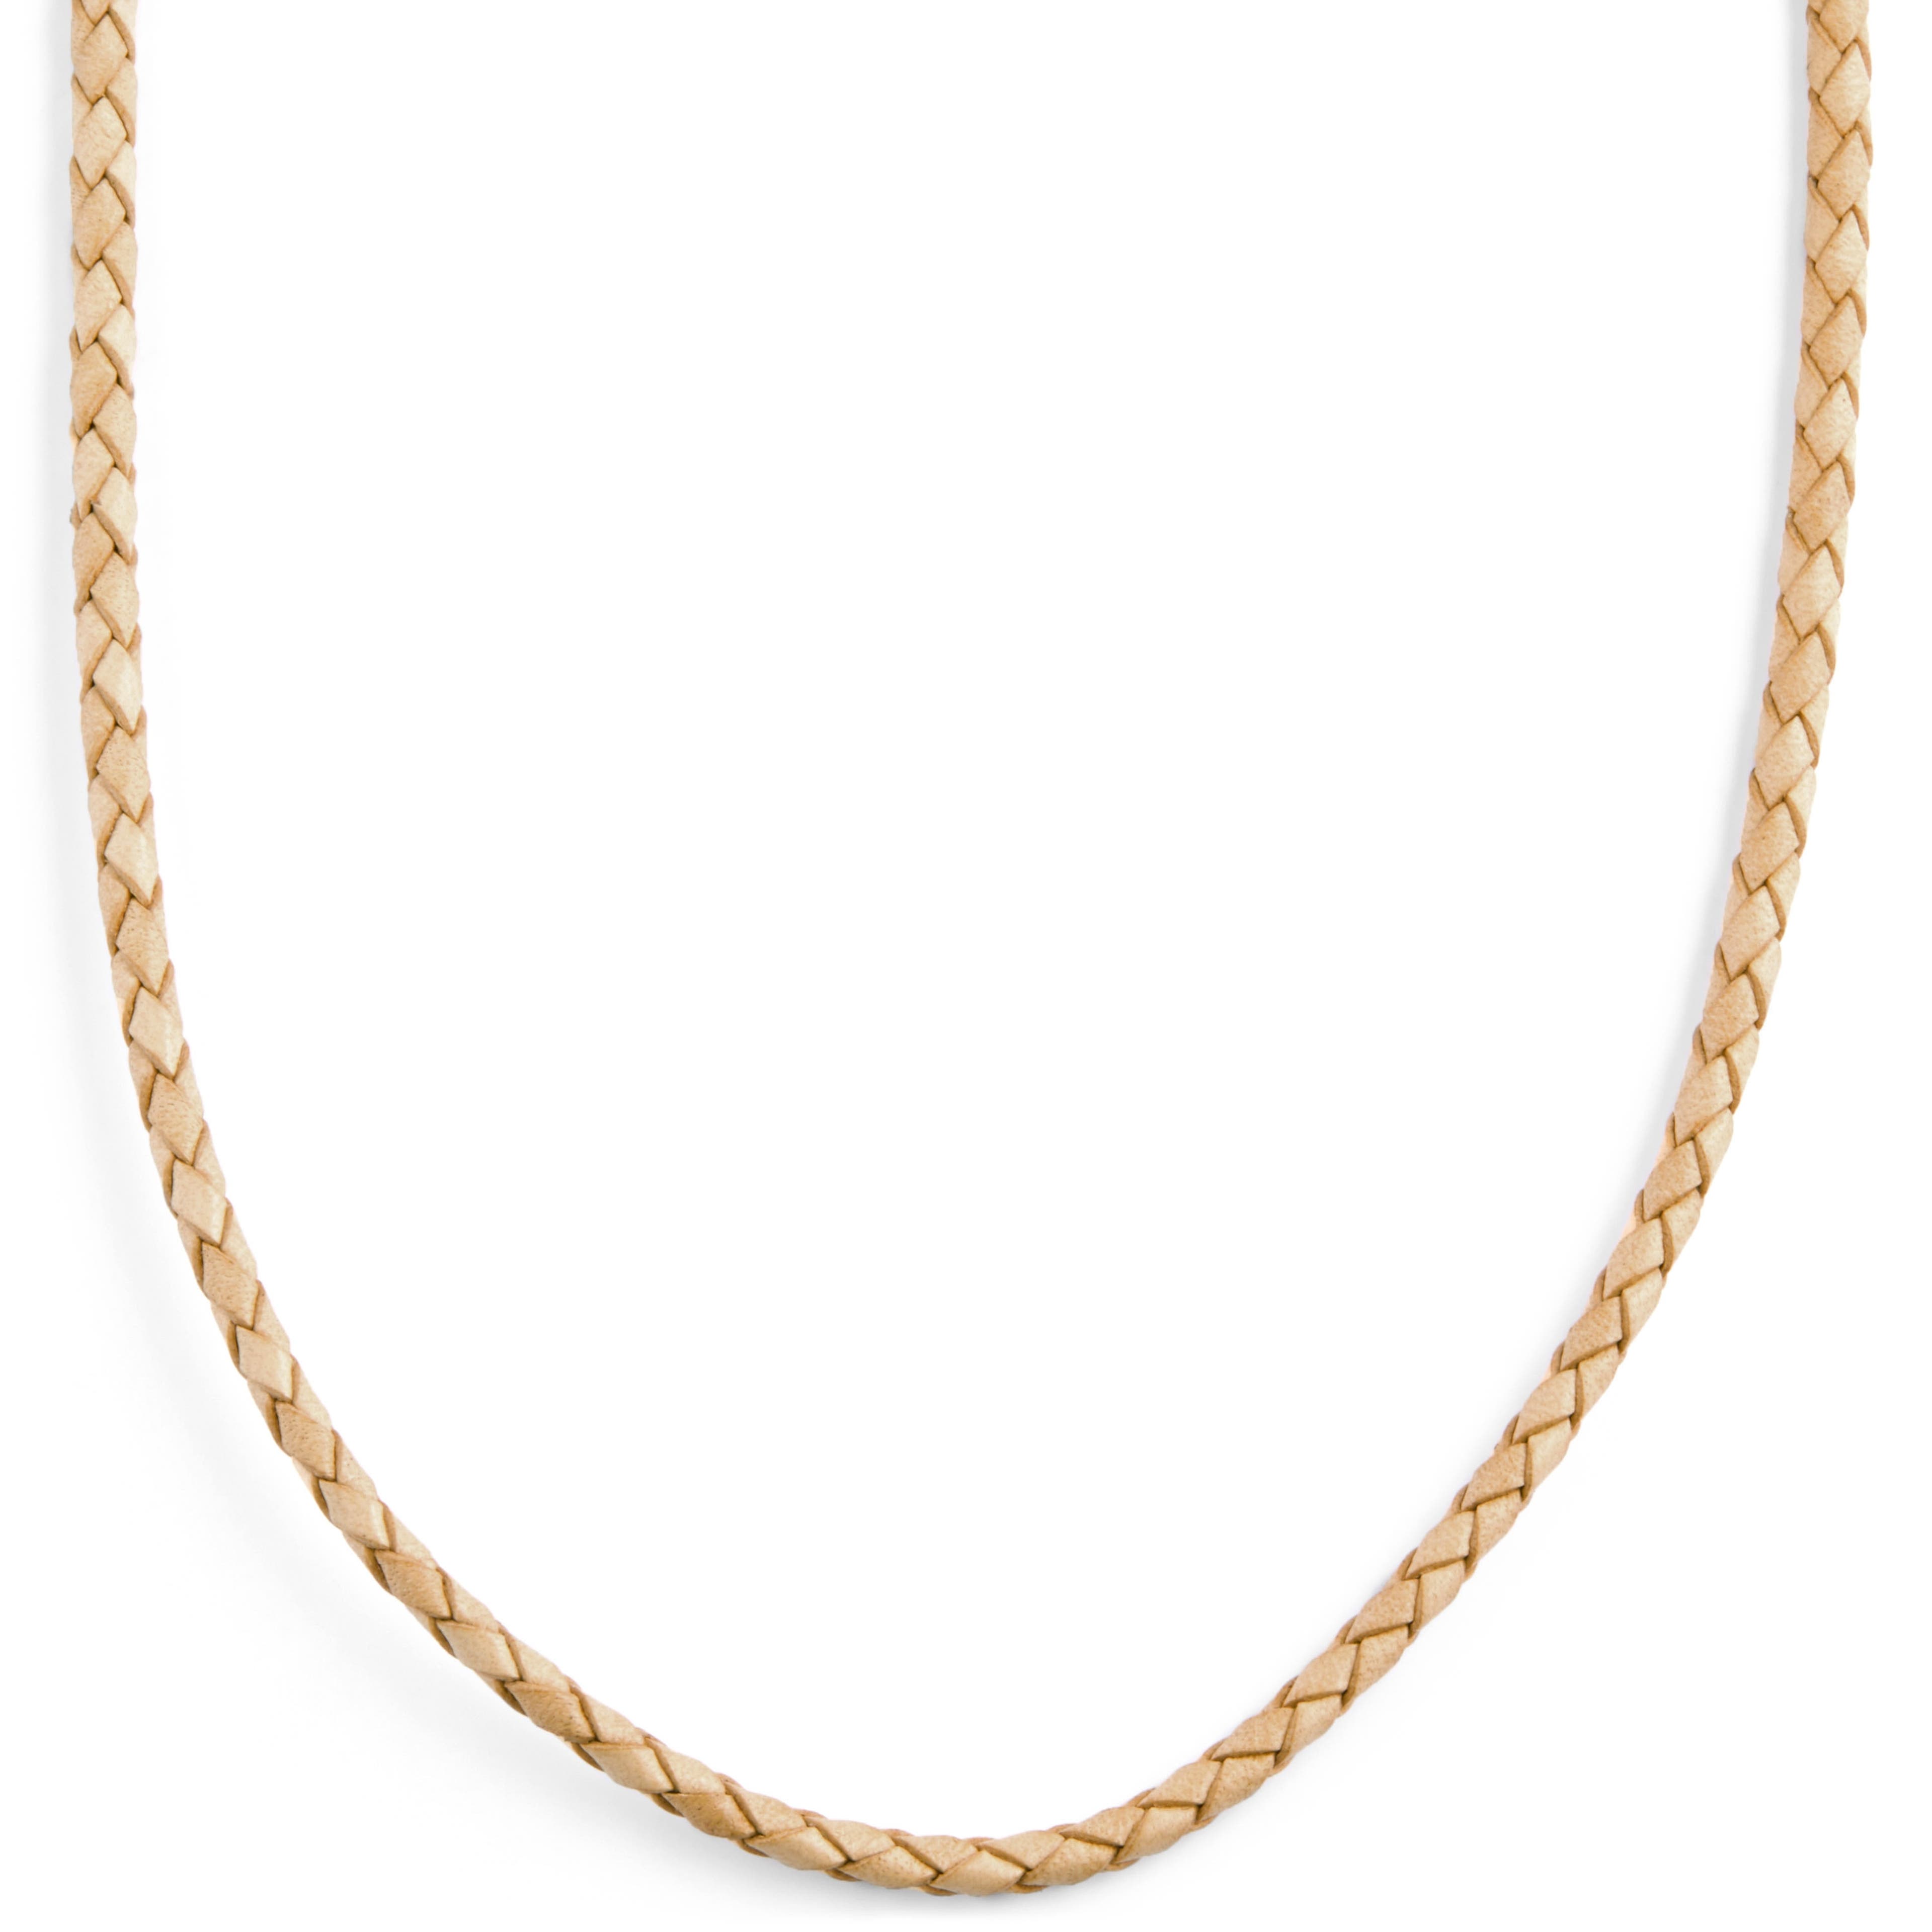 Tenvis | 3 mm Sand Leather Necklace